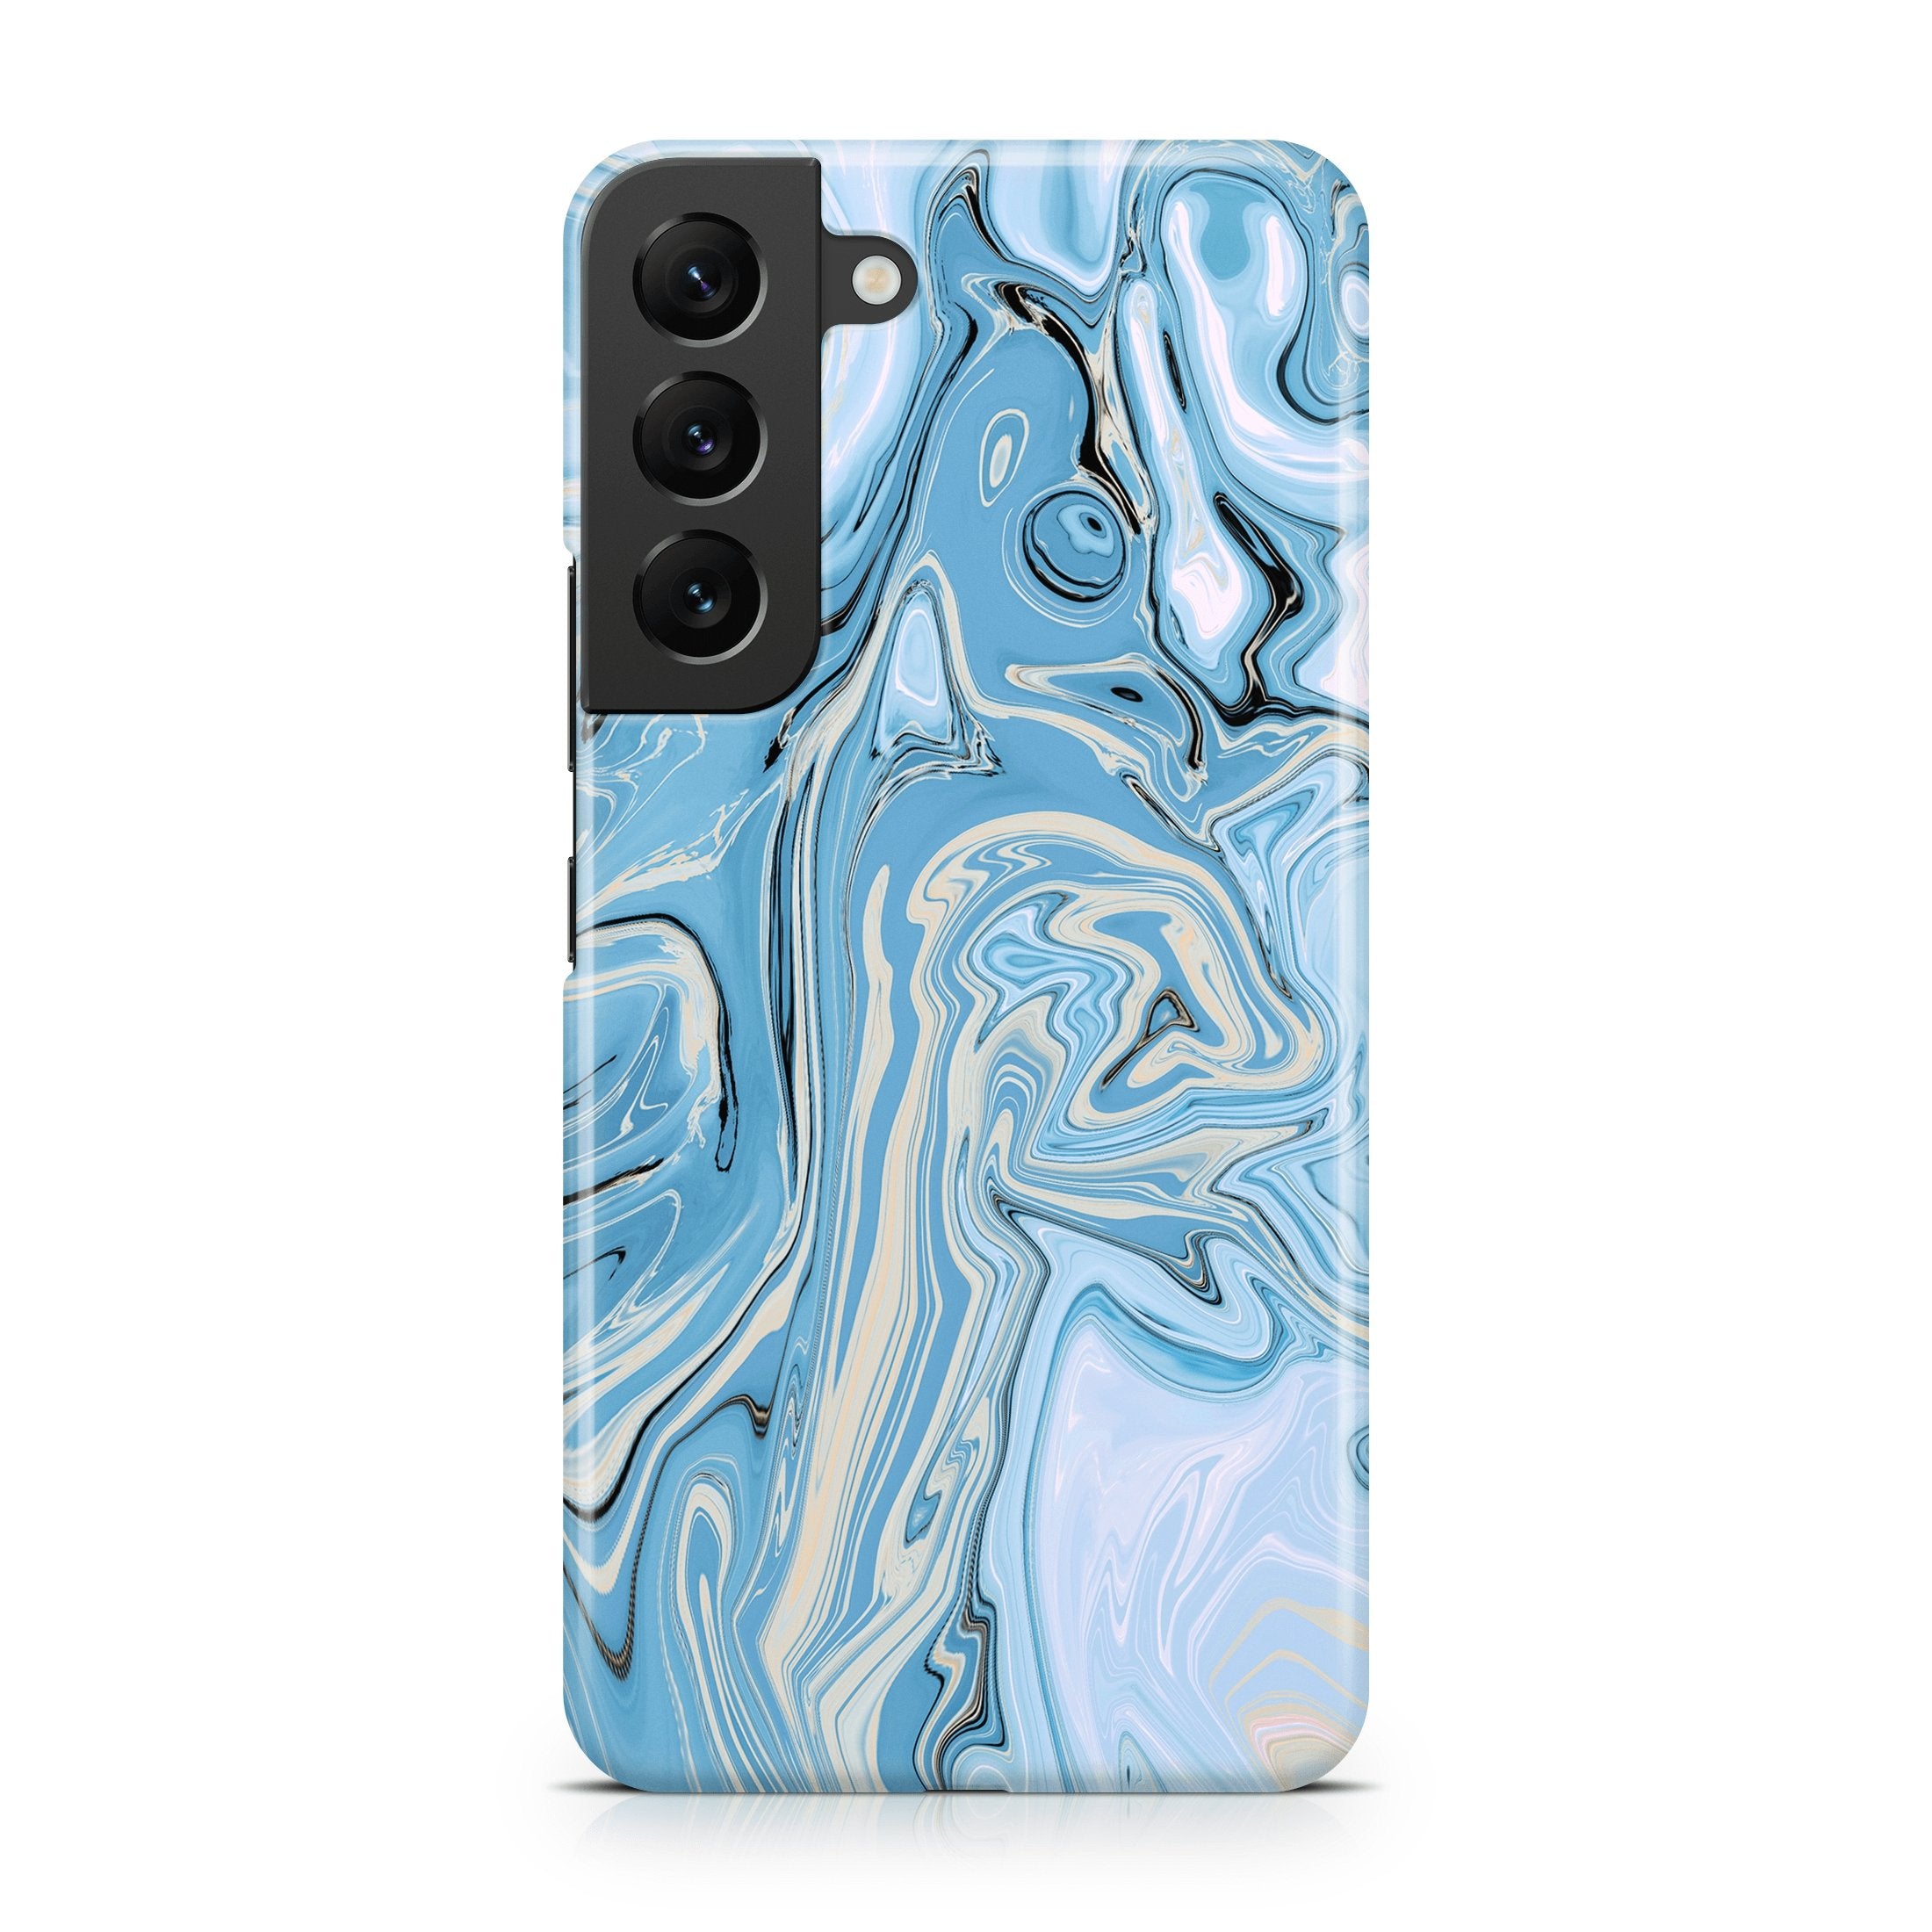 Blue & Creme Agate - Samsung phone case designs by CaseSwagger